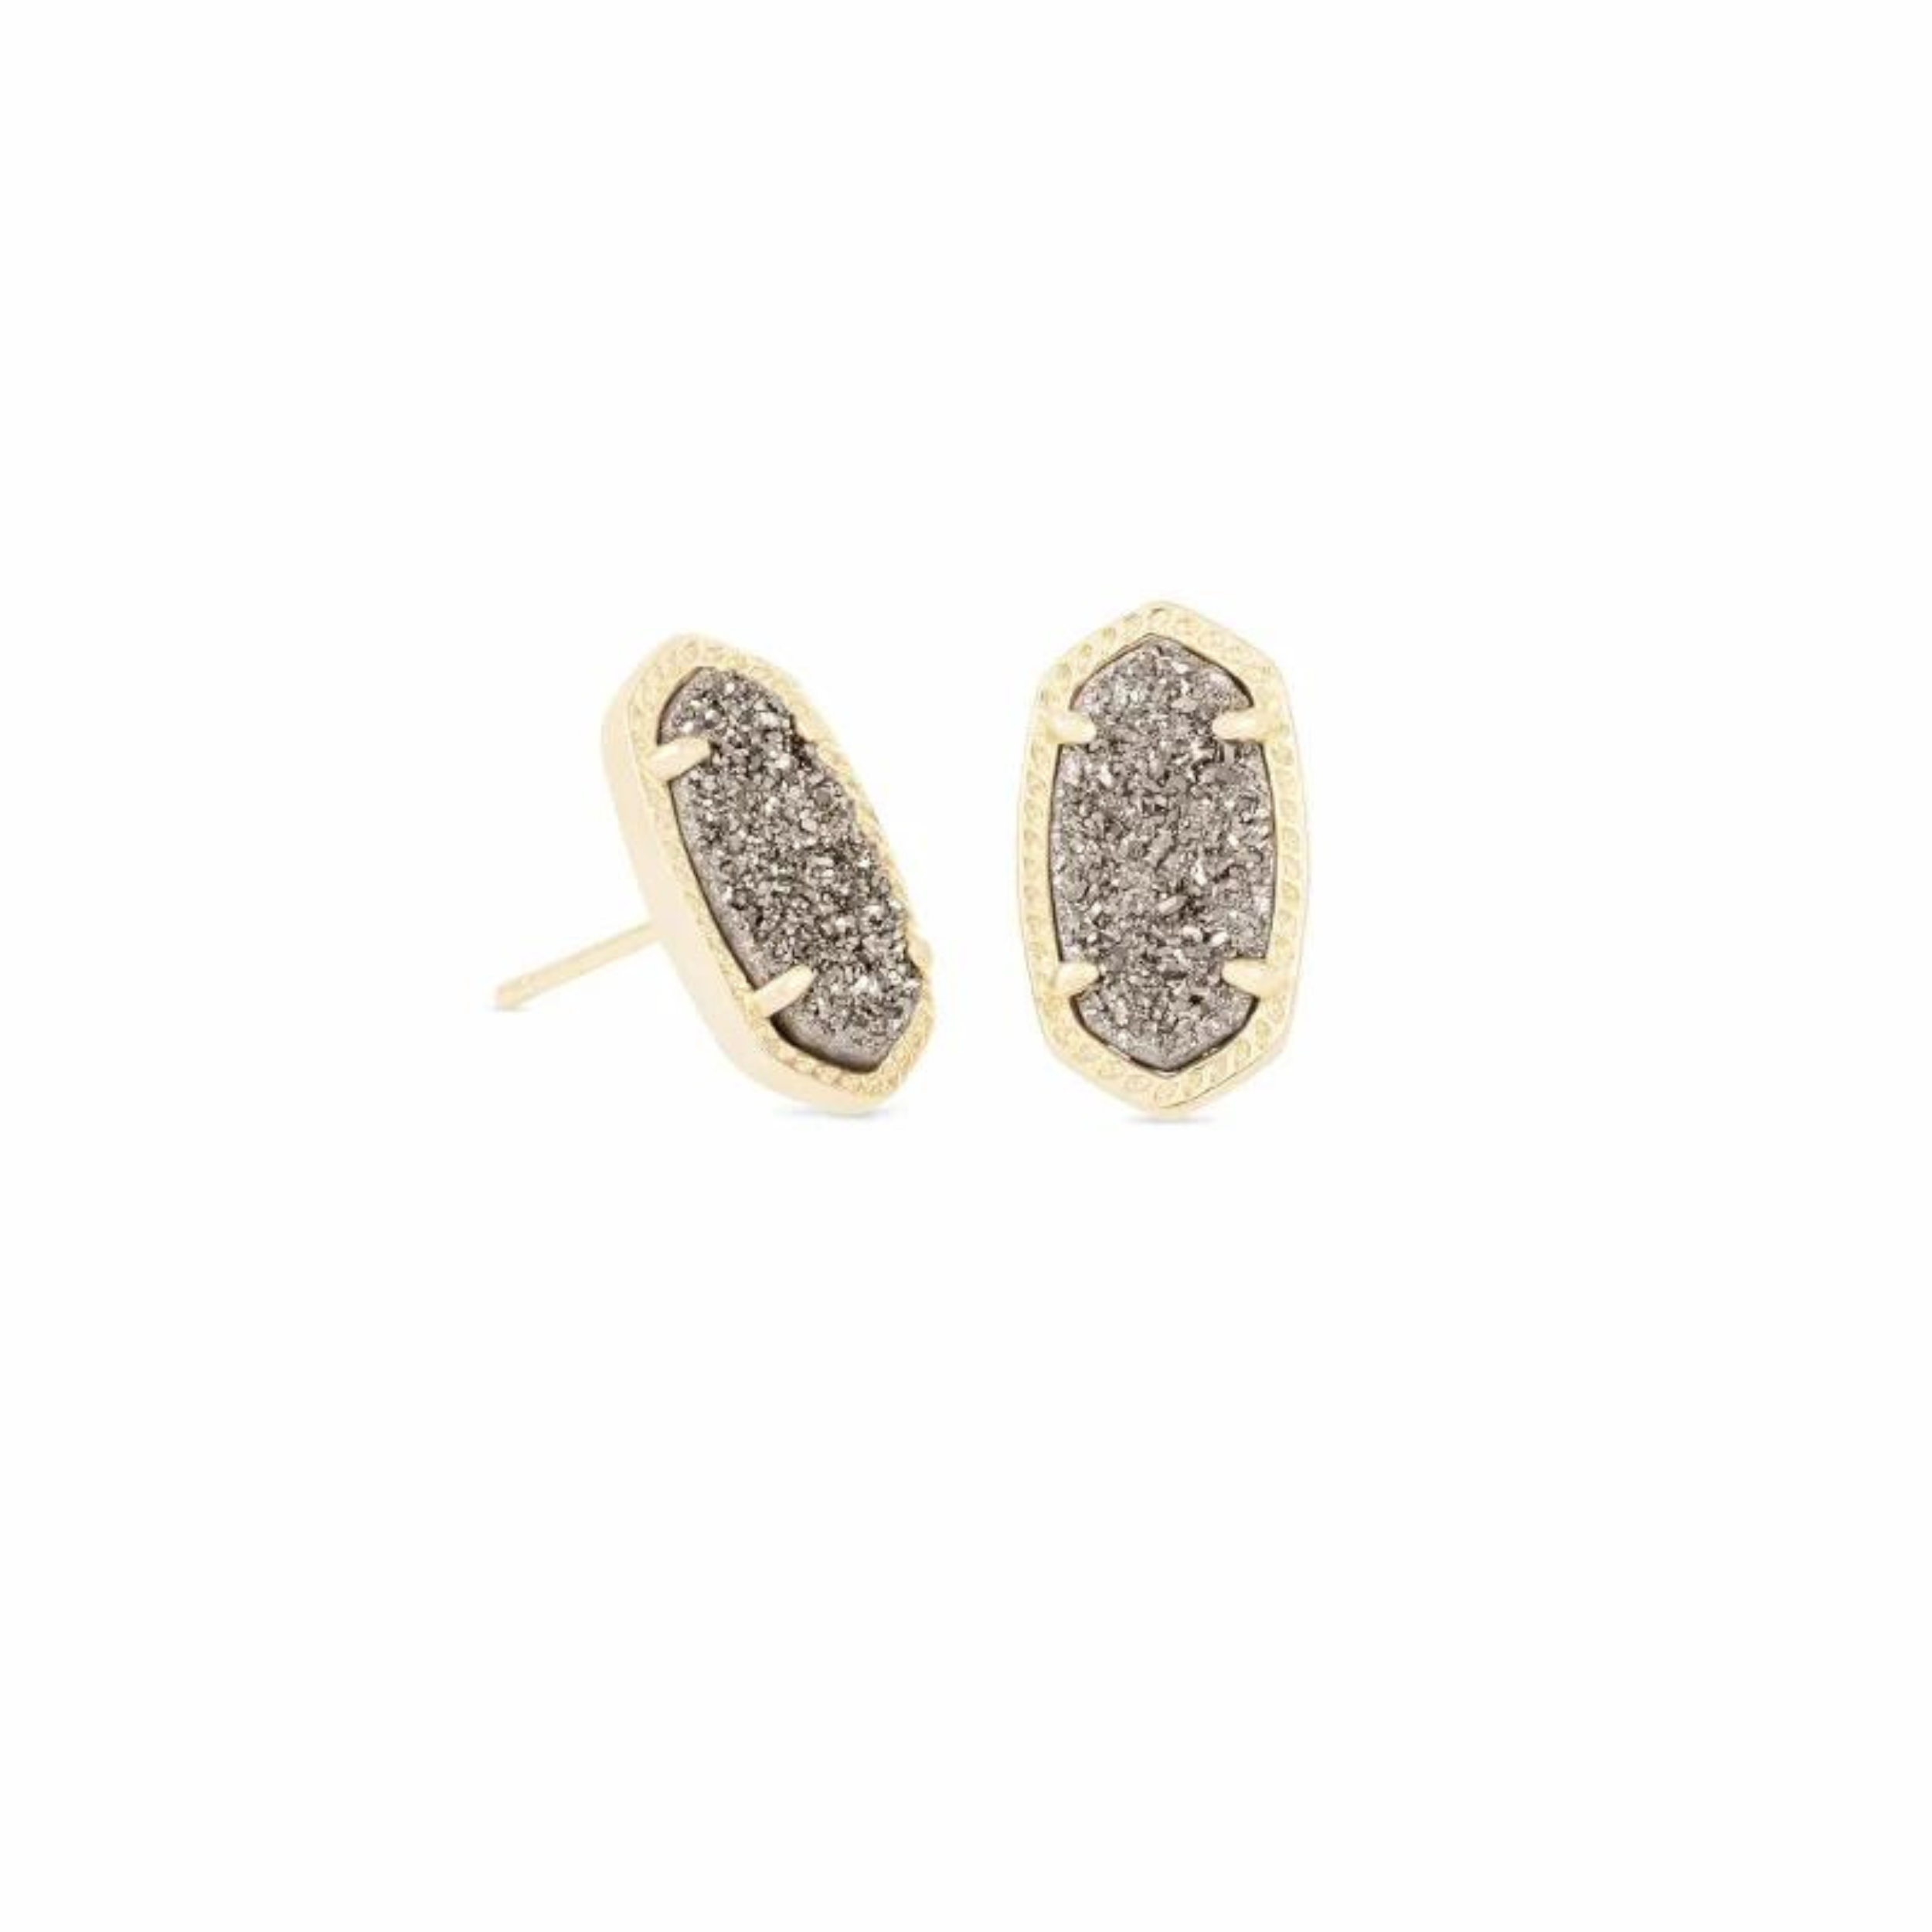 Gold stud earrings with platinum drusy stone, pictured on a white background.